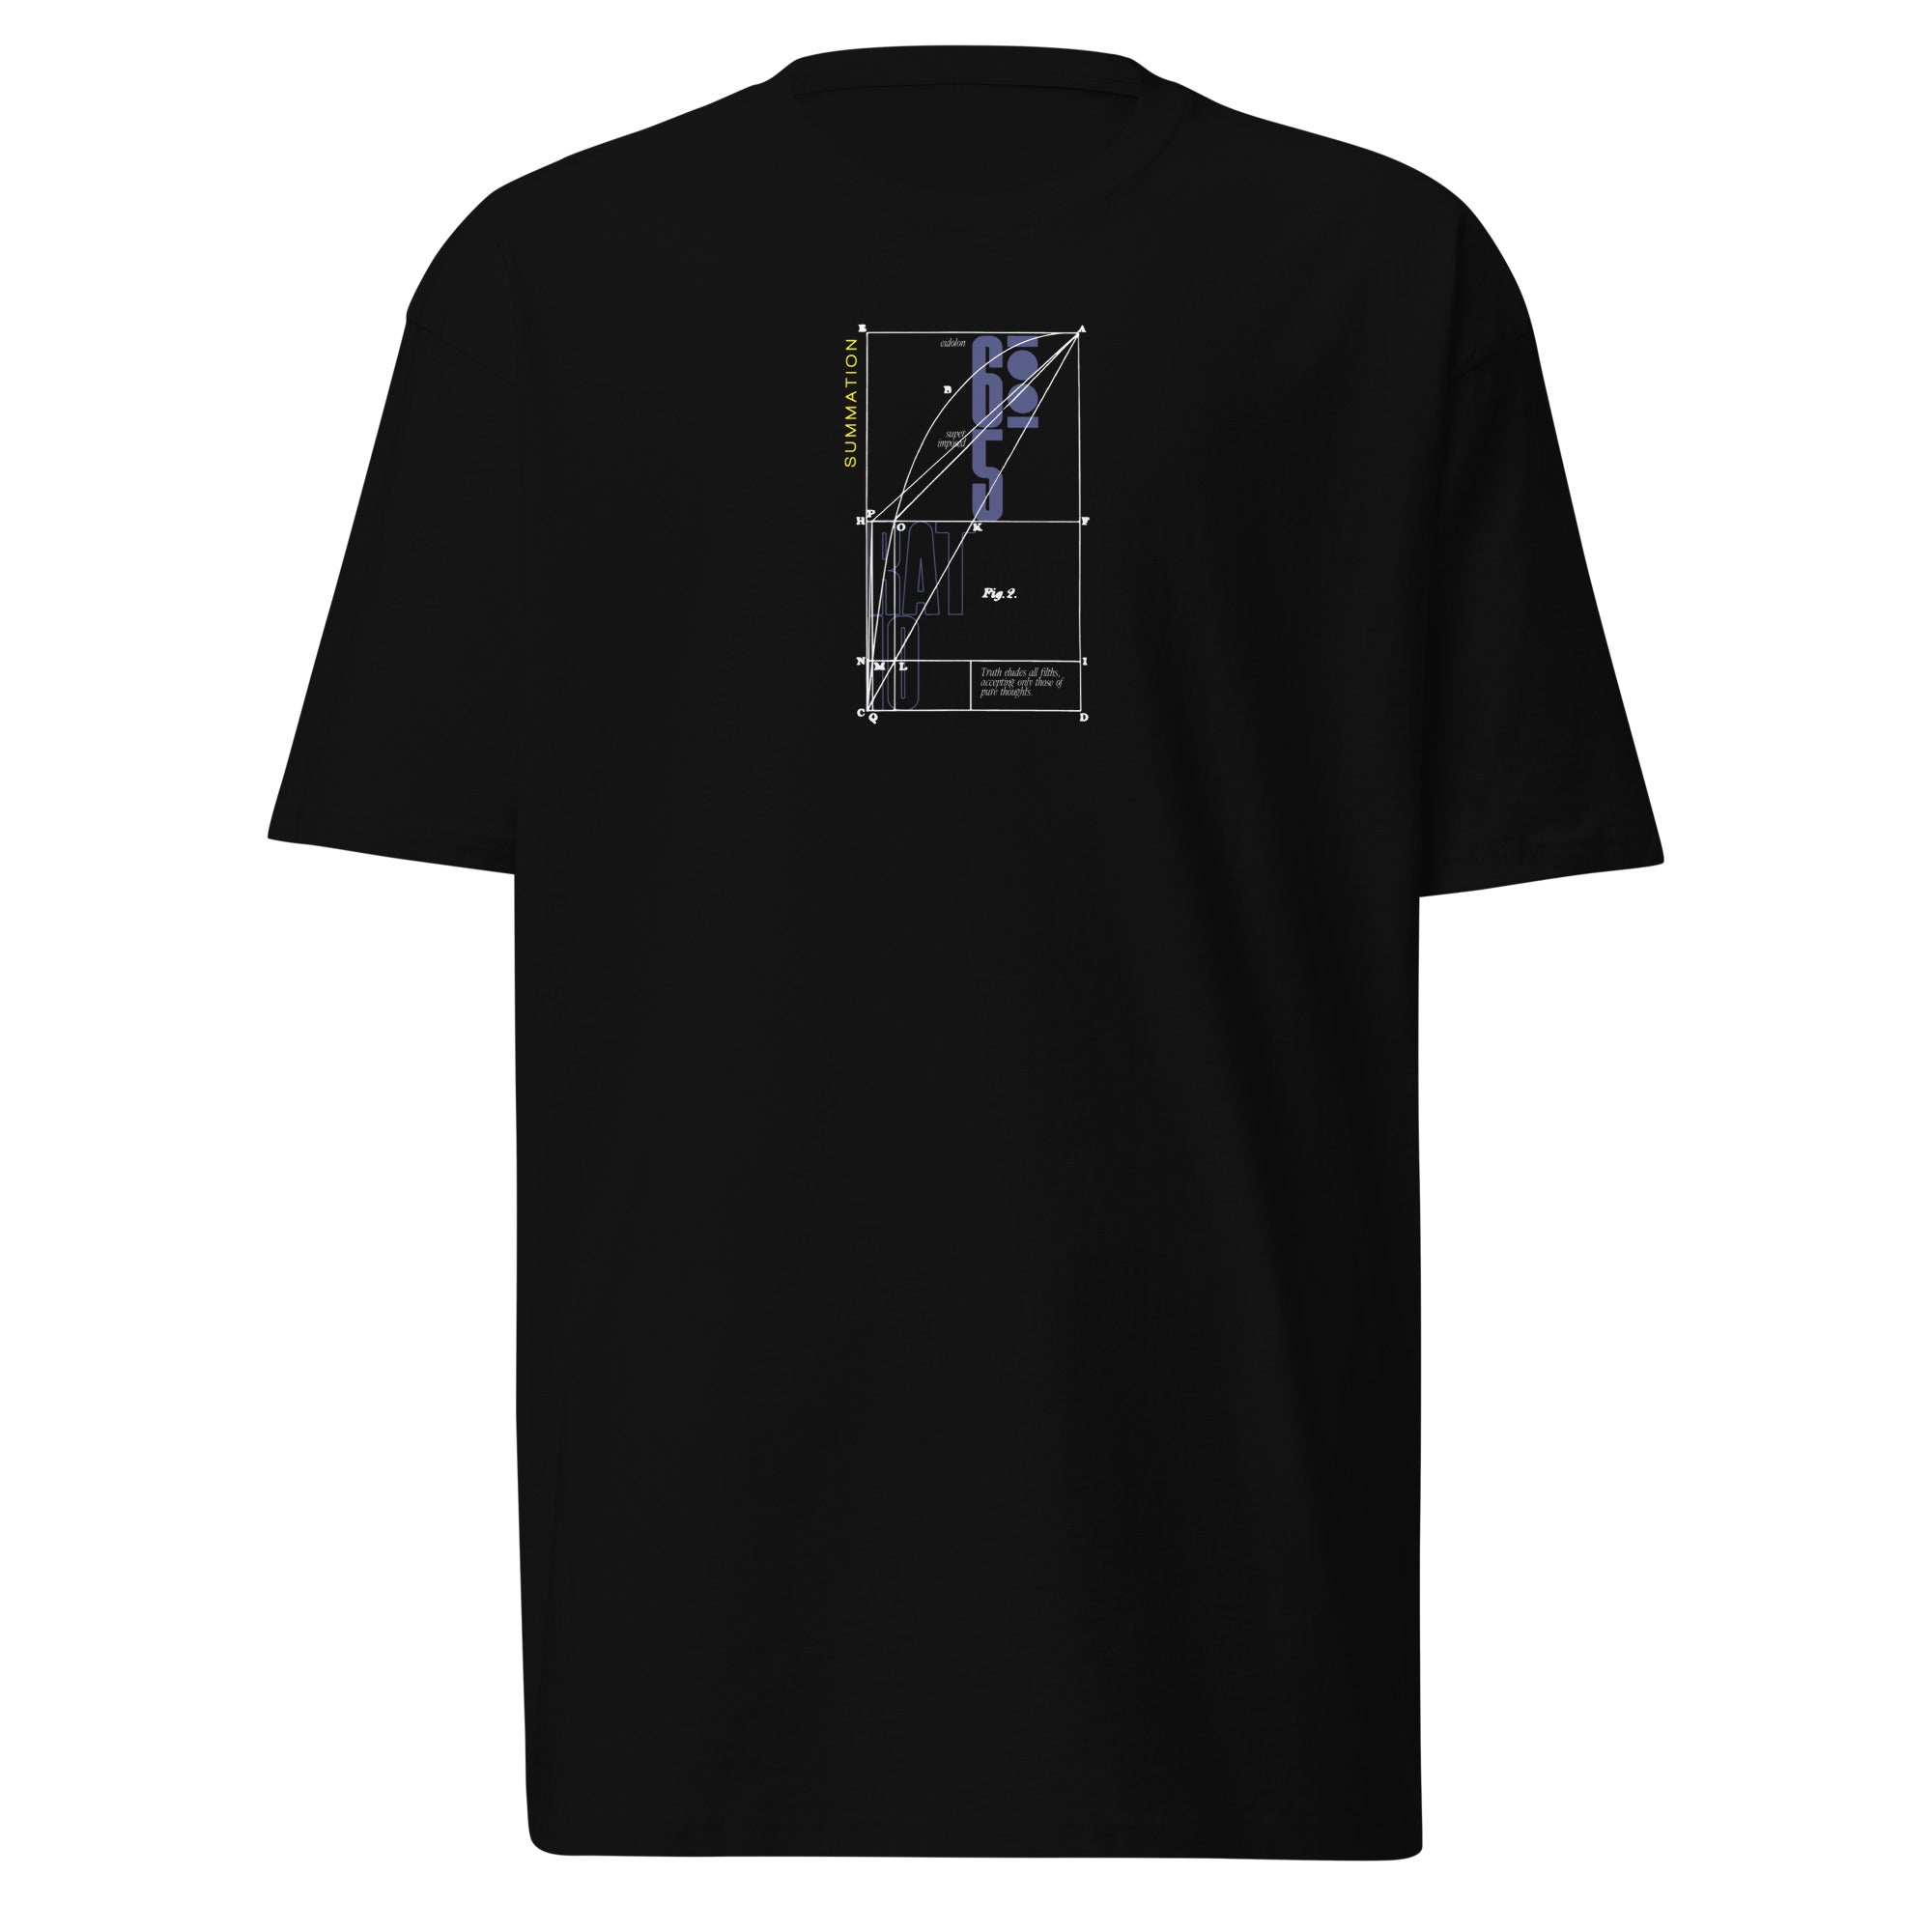 0 PTS. • t-shirt - Jackler - anime-inspired streetwear - anime clothing